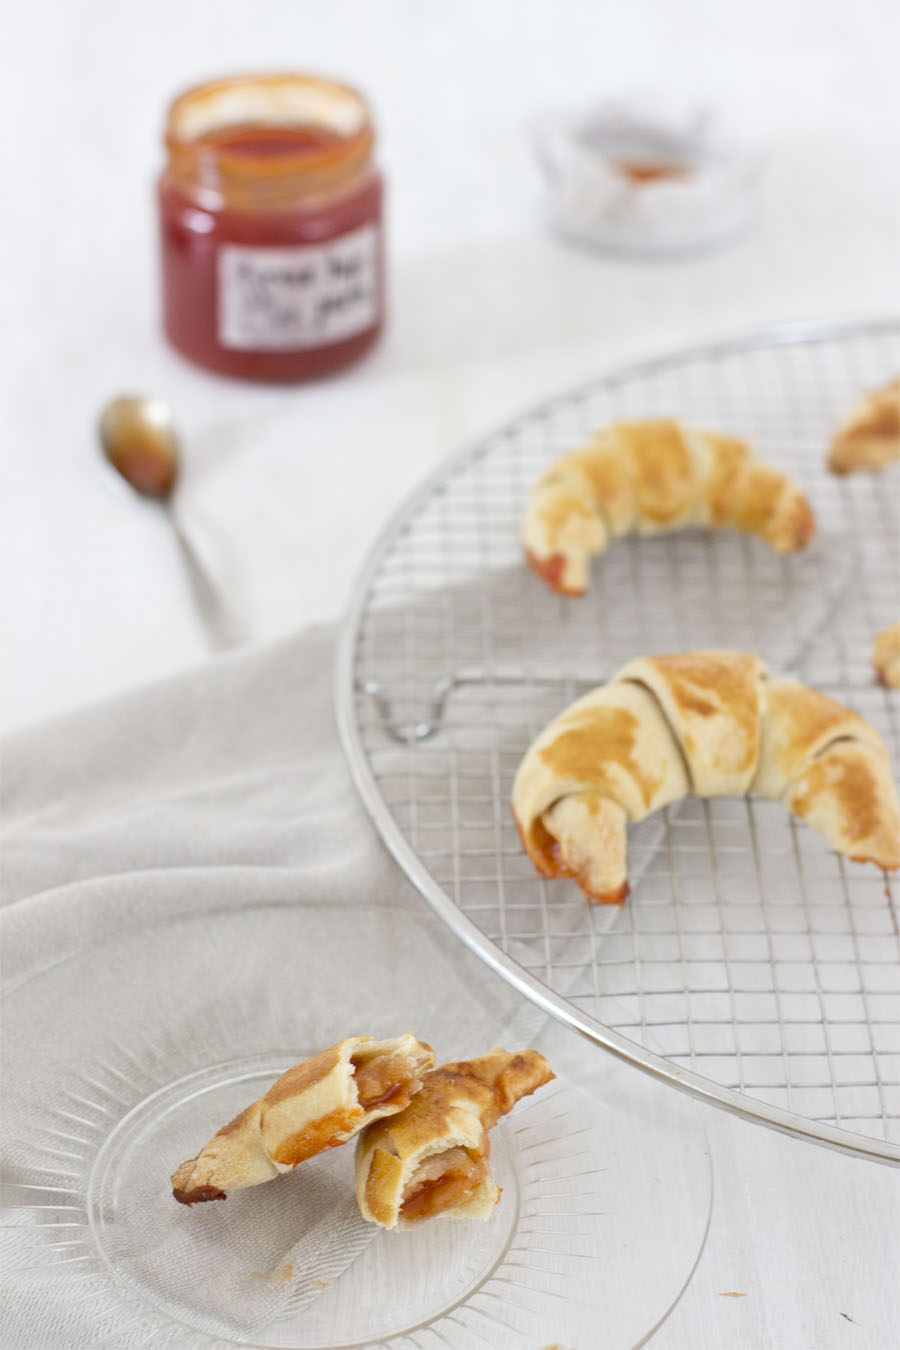 Handmade puff pastry rose hip croissants | LOOK WHAT I MADE ...